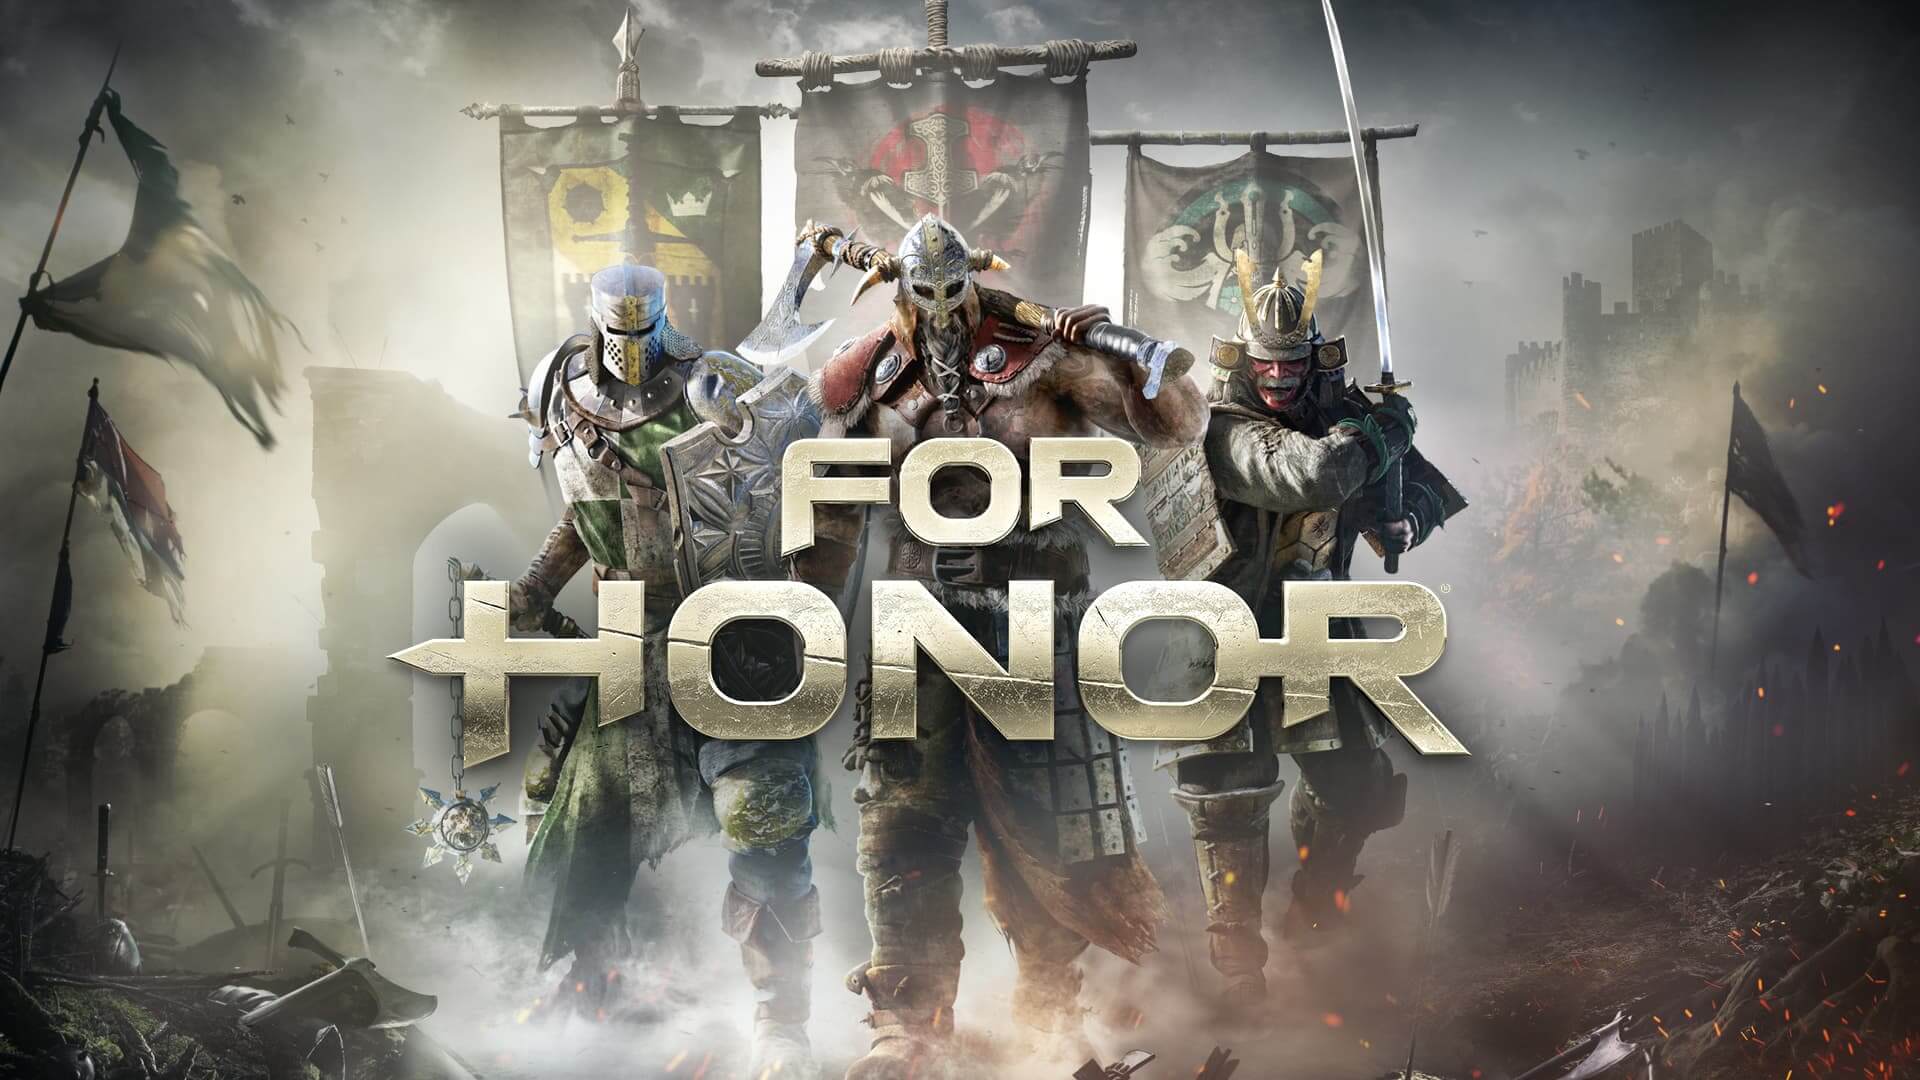 For Honor IOS Latest Version Free Download